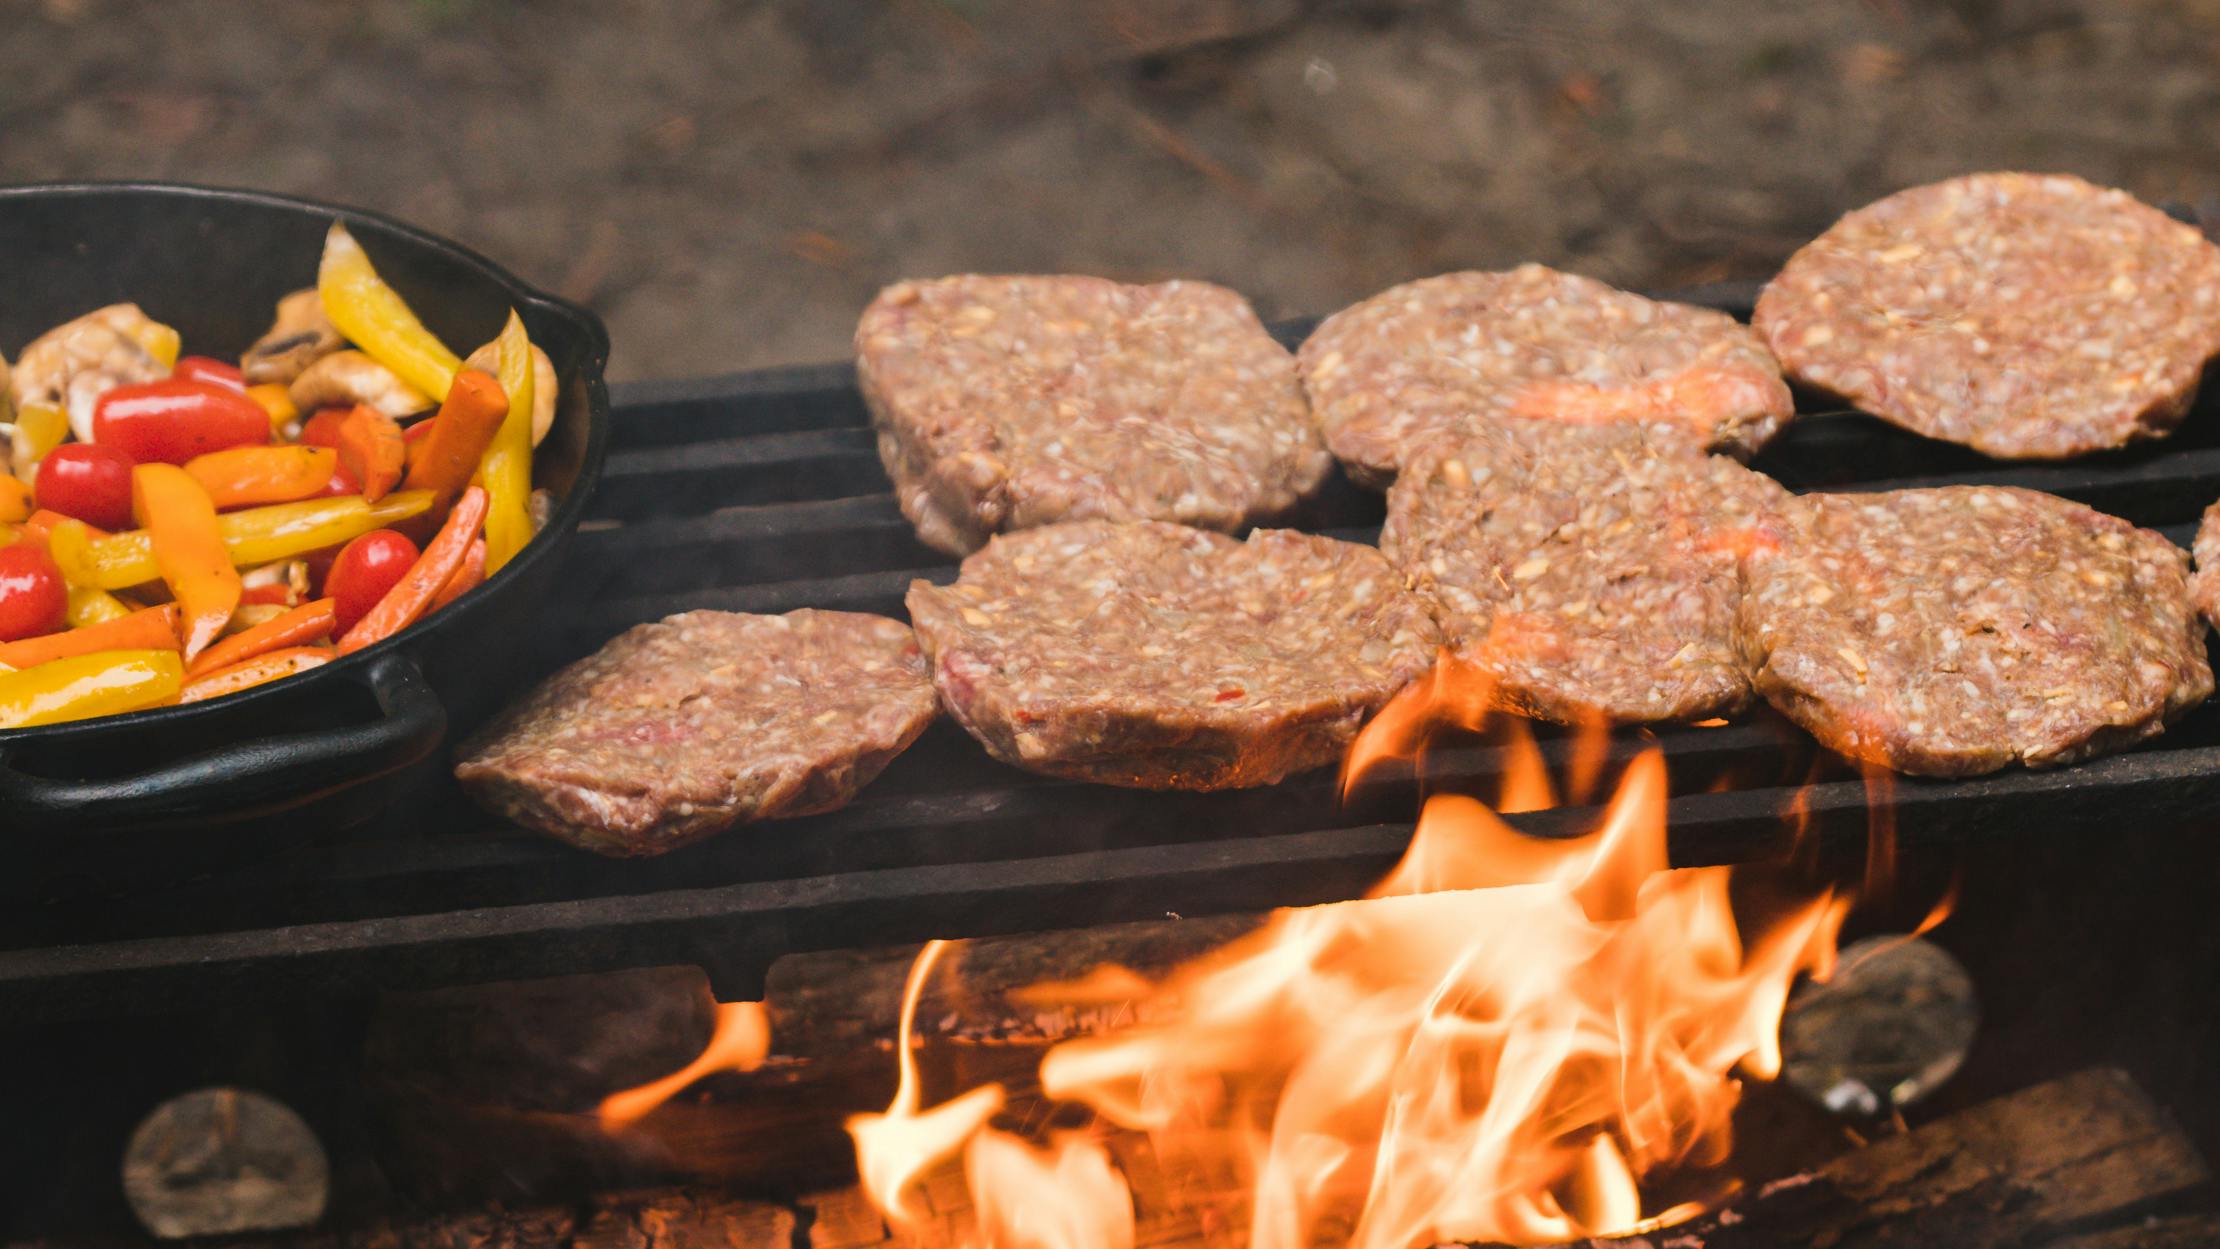 Burger patties and a frying pan grilling vegetables cooking over a campfire